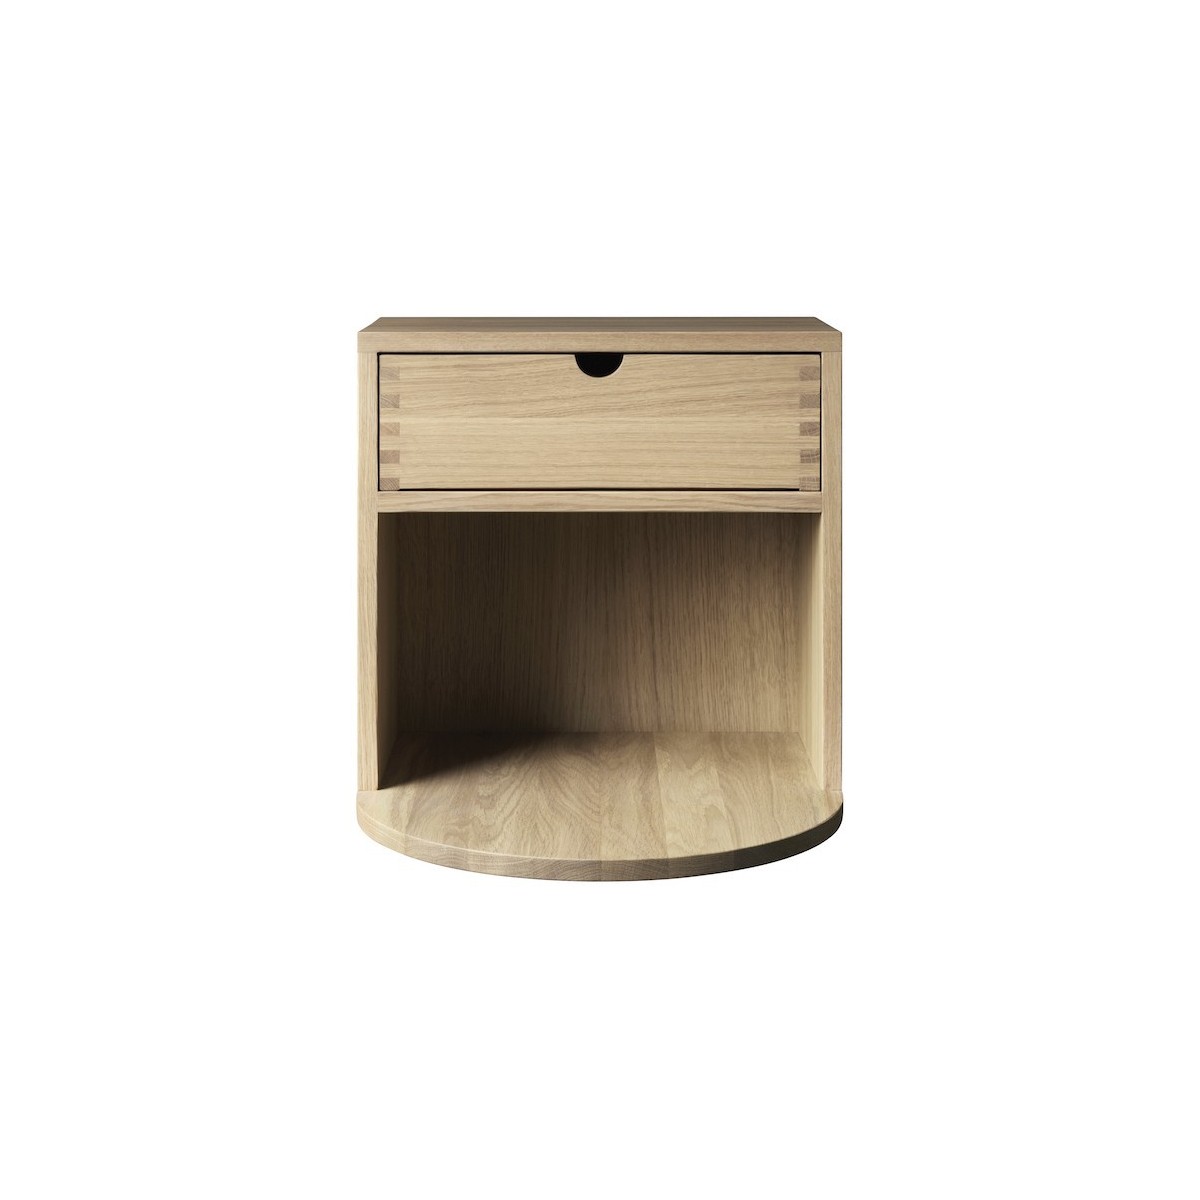 SOLD OUT natural lacquered oak - Radius nightstand